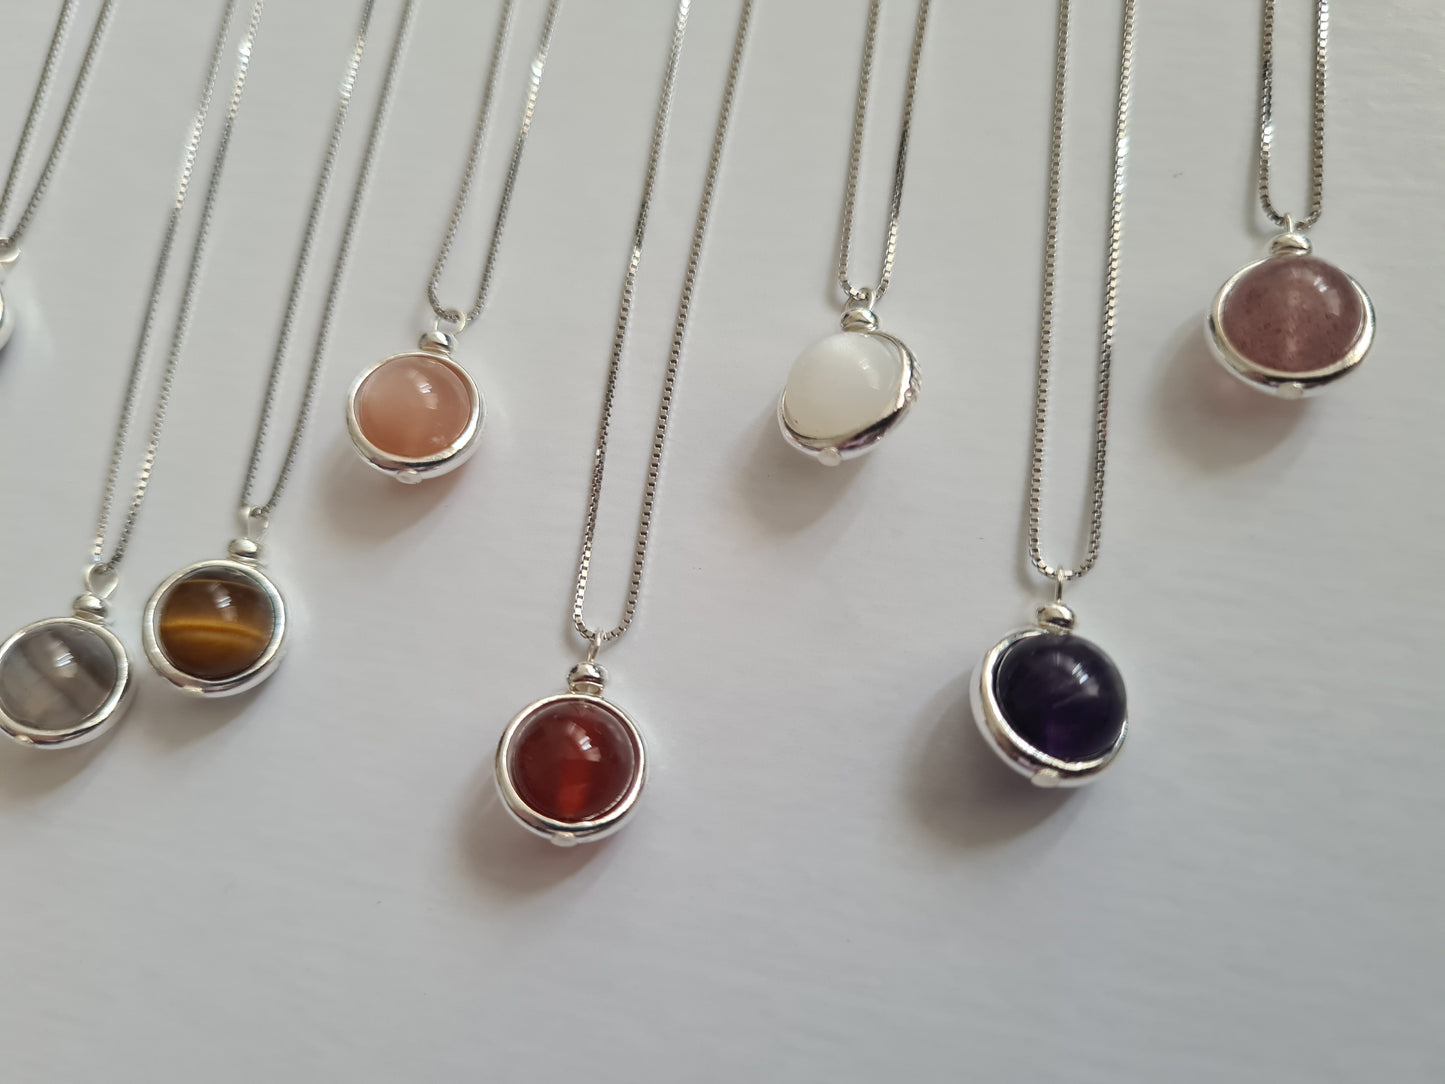 The Earth Turns Sterling Silver Necklace Collection showing the Warm Coloured Crystals